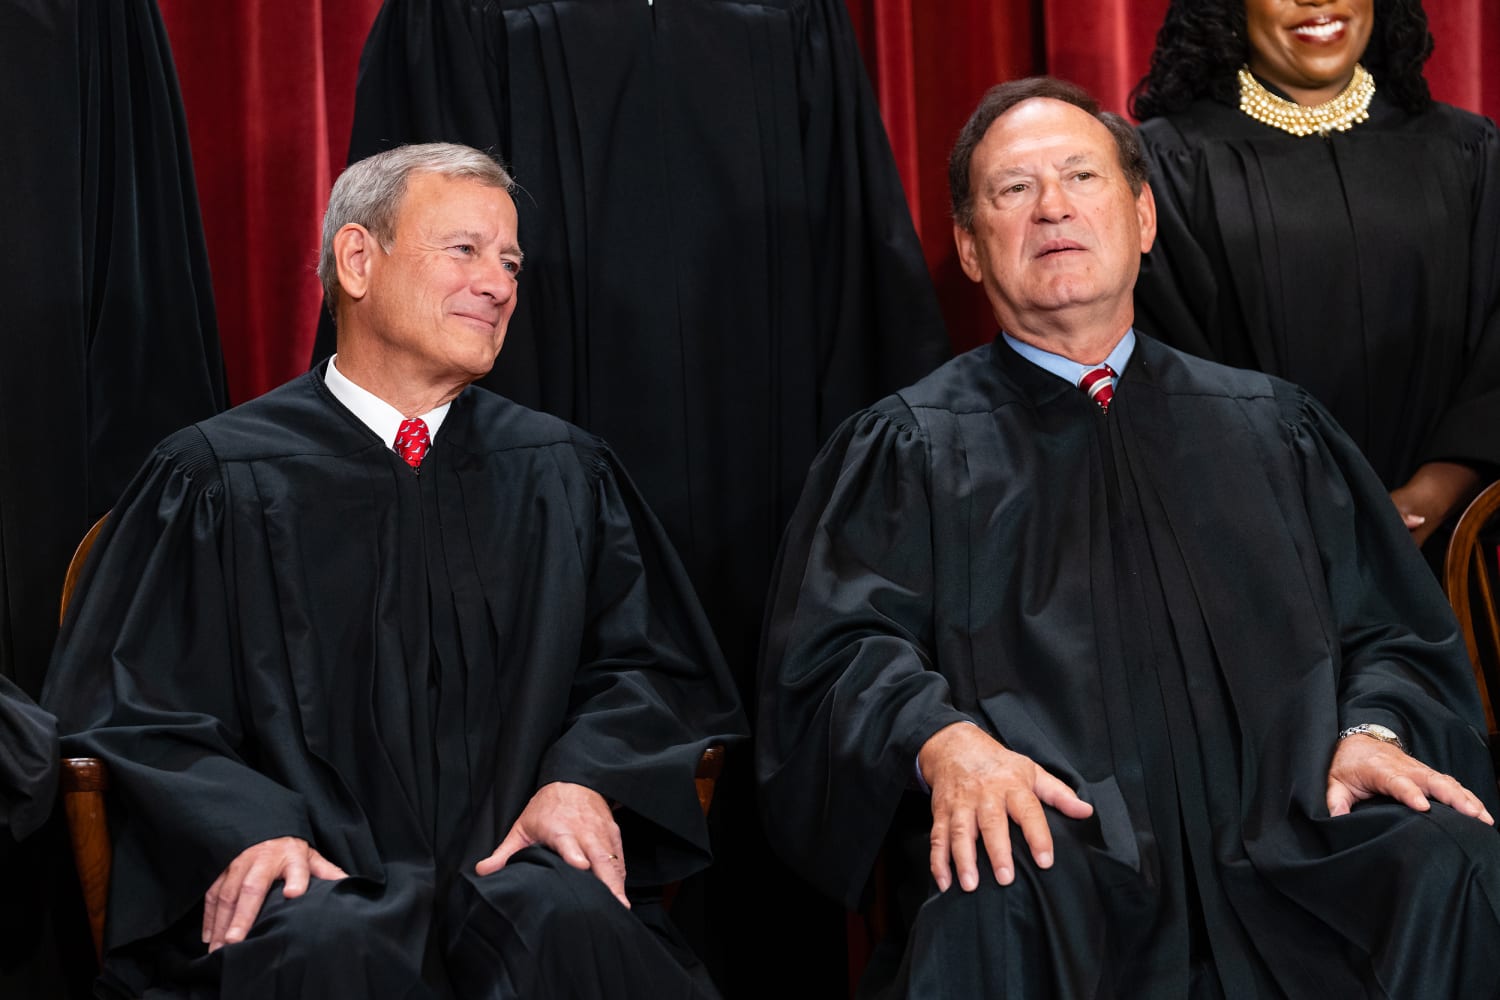 Hon. John Roberts, Chief Justice of the United States, Part 3